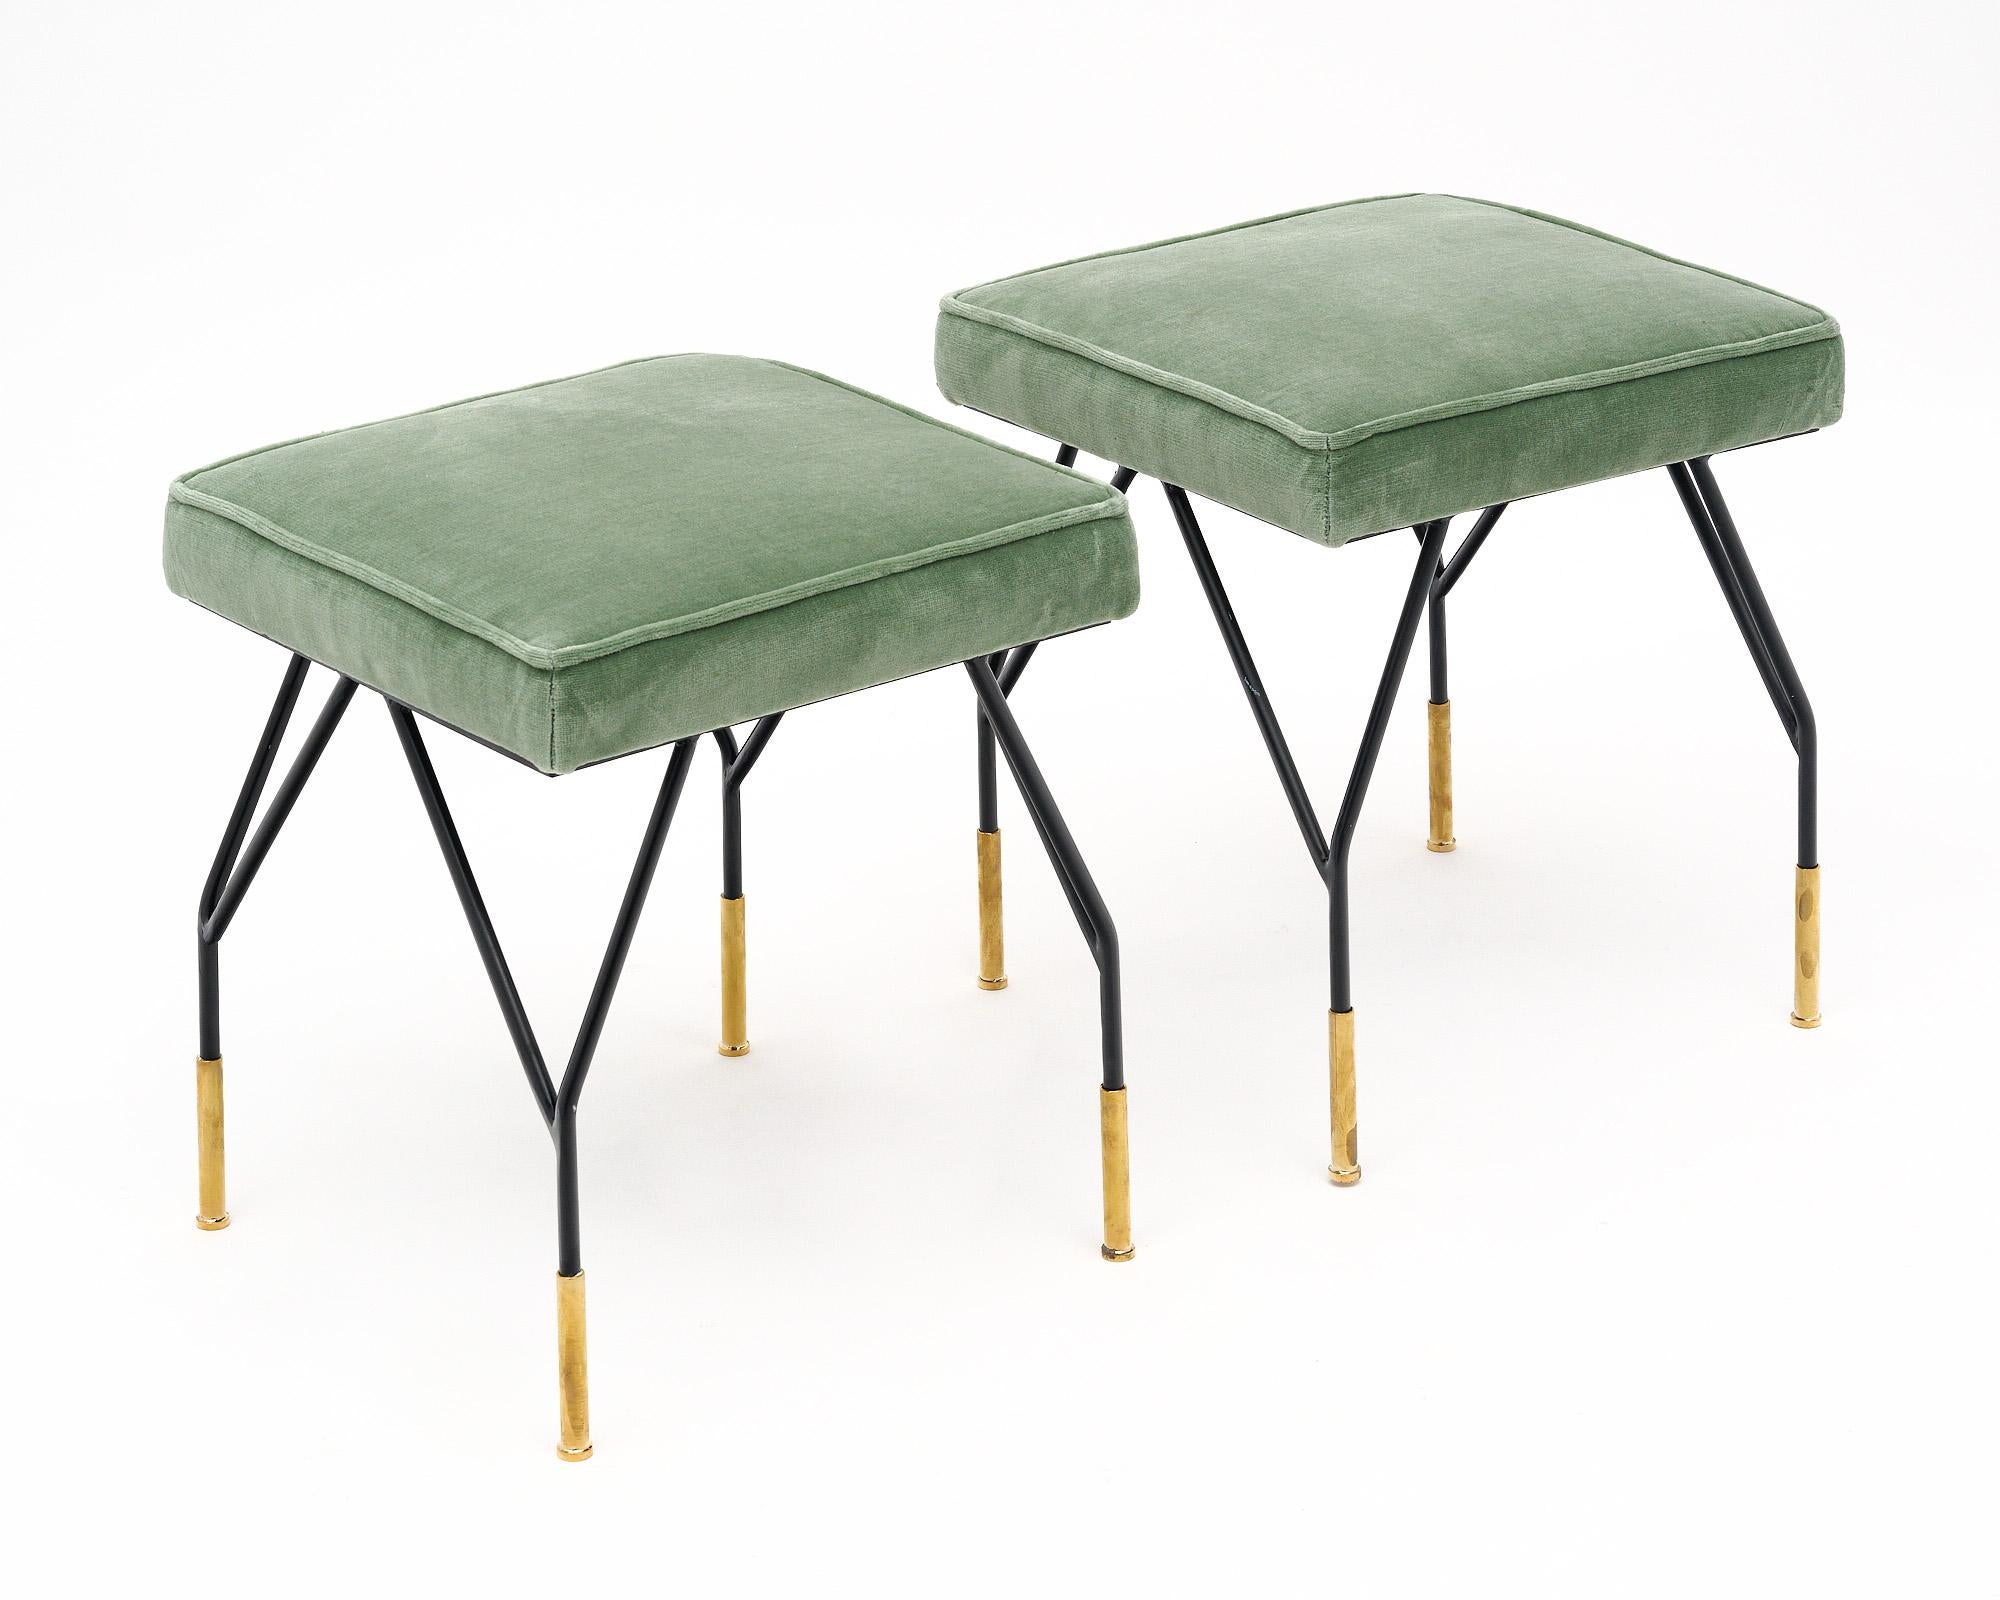 Pair of Italian stools in the style of designer Carlo di Carli. The pair features the black lacquered steel bases with gilt brass feet that are iconic of the designer. They are upholstered in a new sage green velvet fabric.
